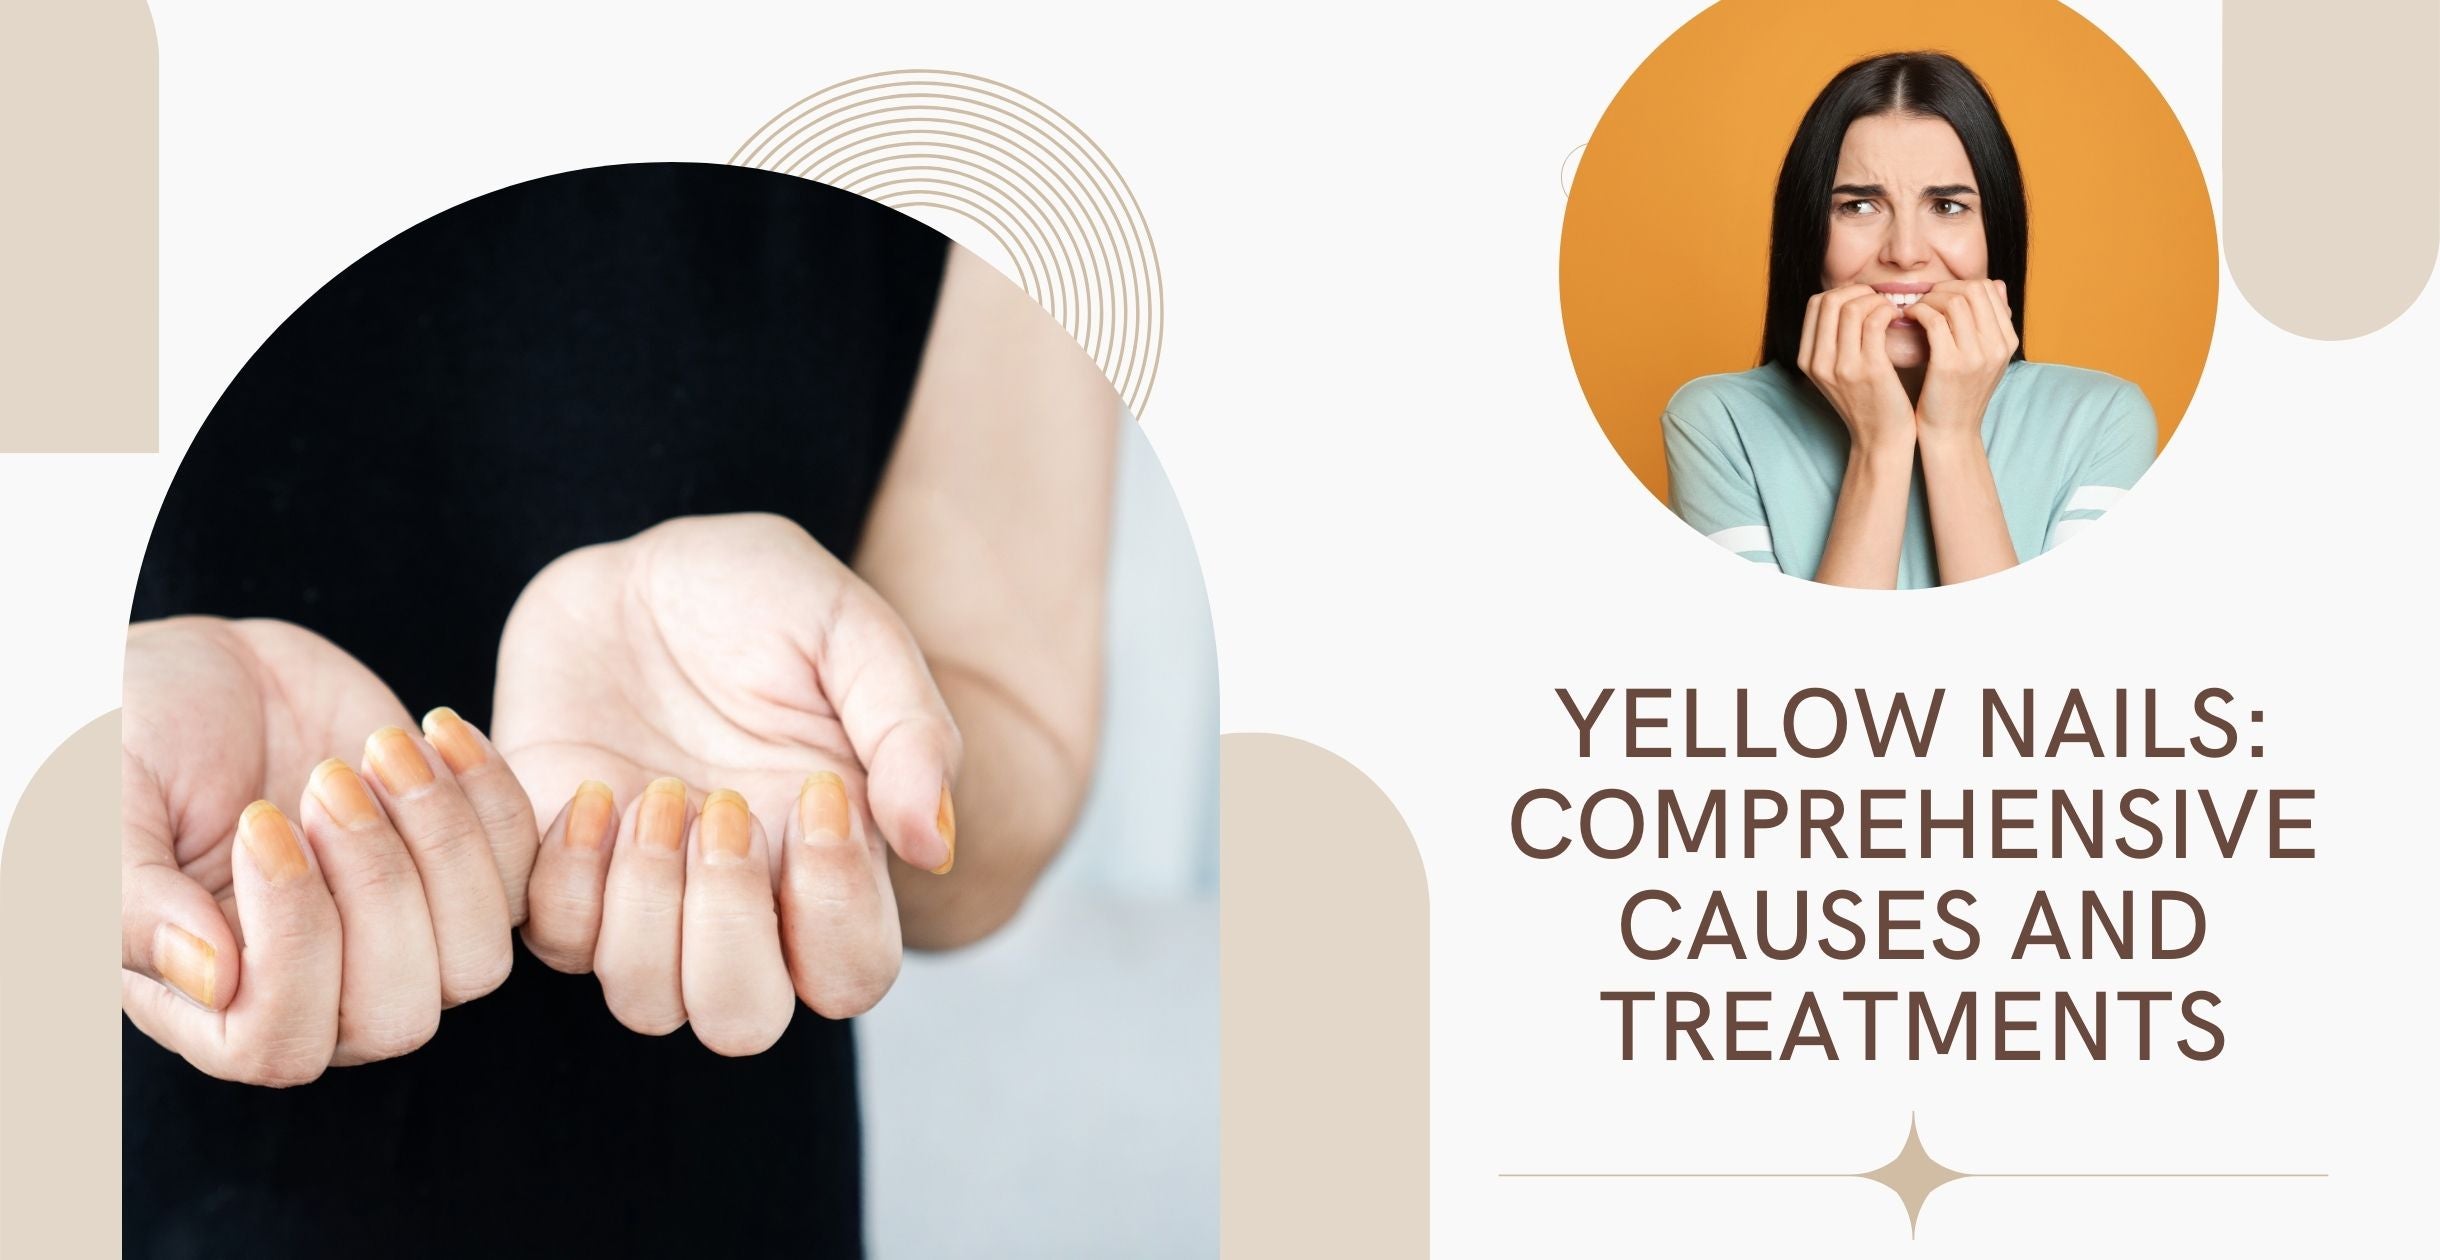 Yellow Nails: Comprehensive Causes and Treatments